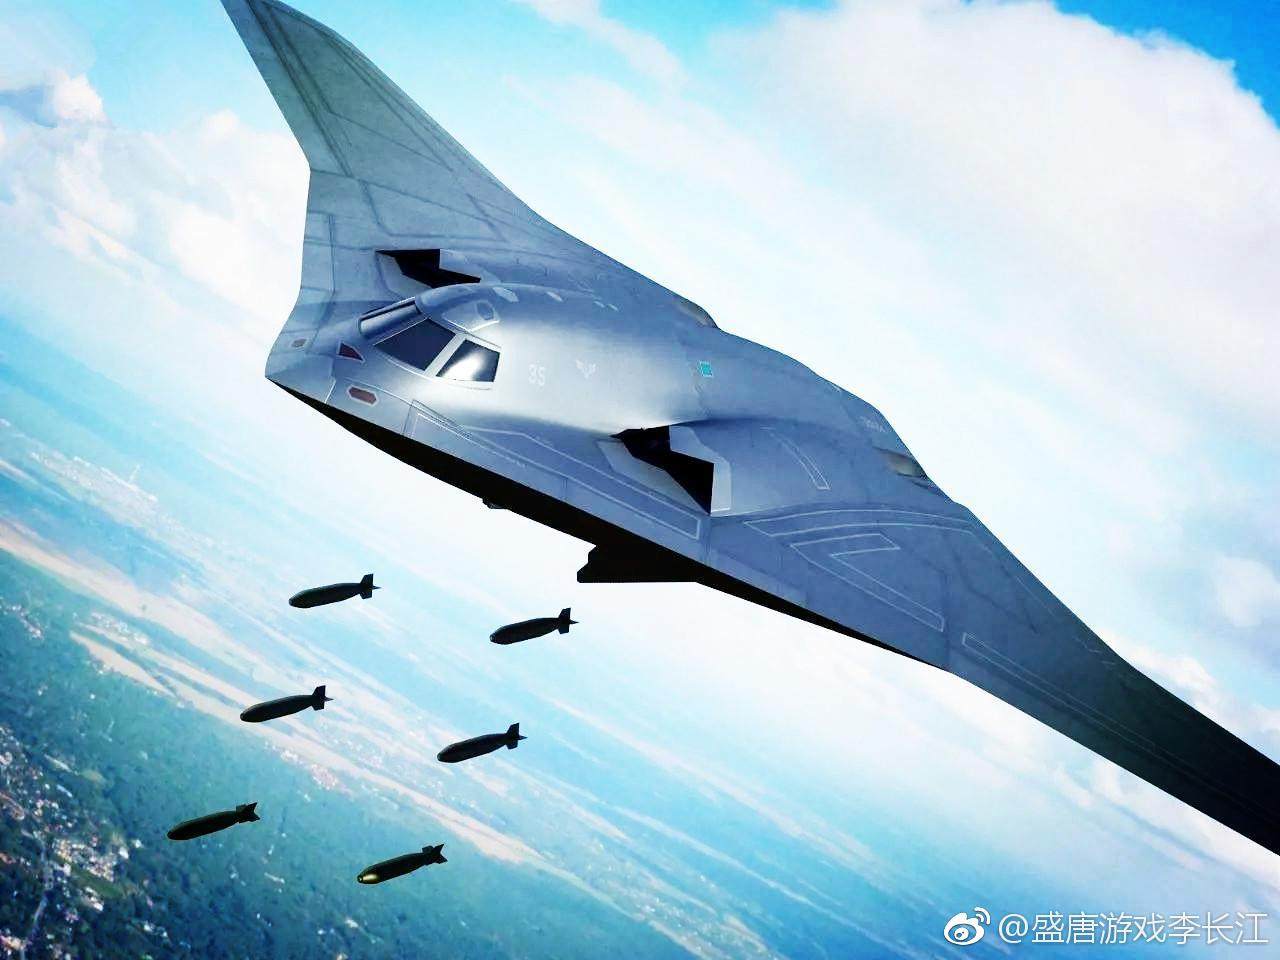 An artist’s impression of China’s mysterious H-20 stealth bomber. Photo: Weibo